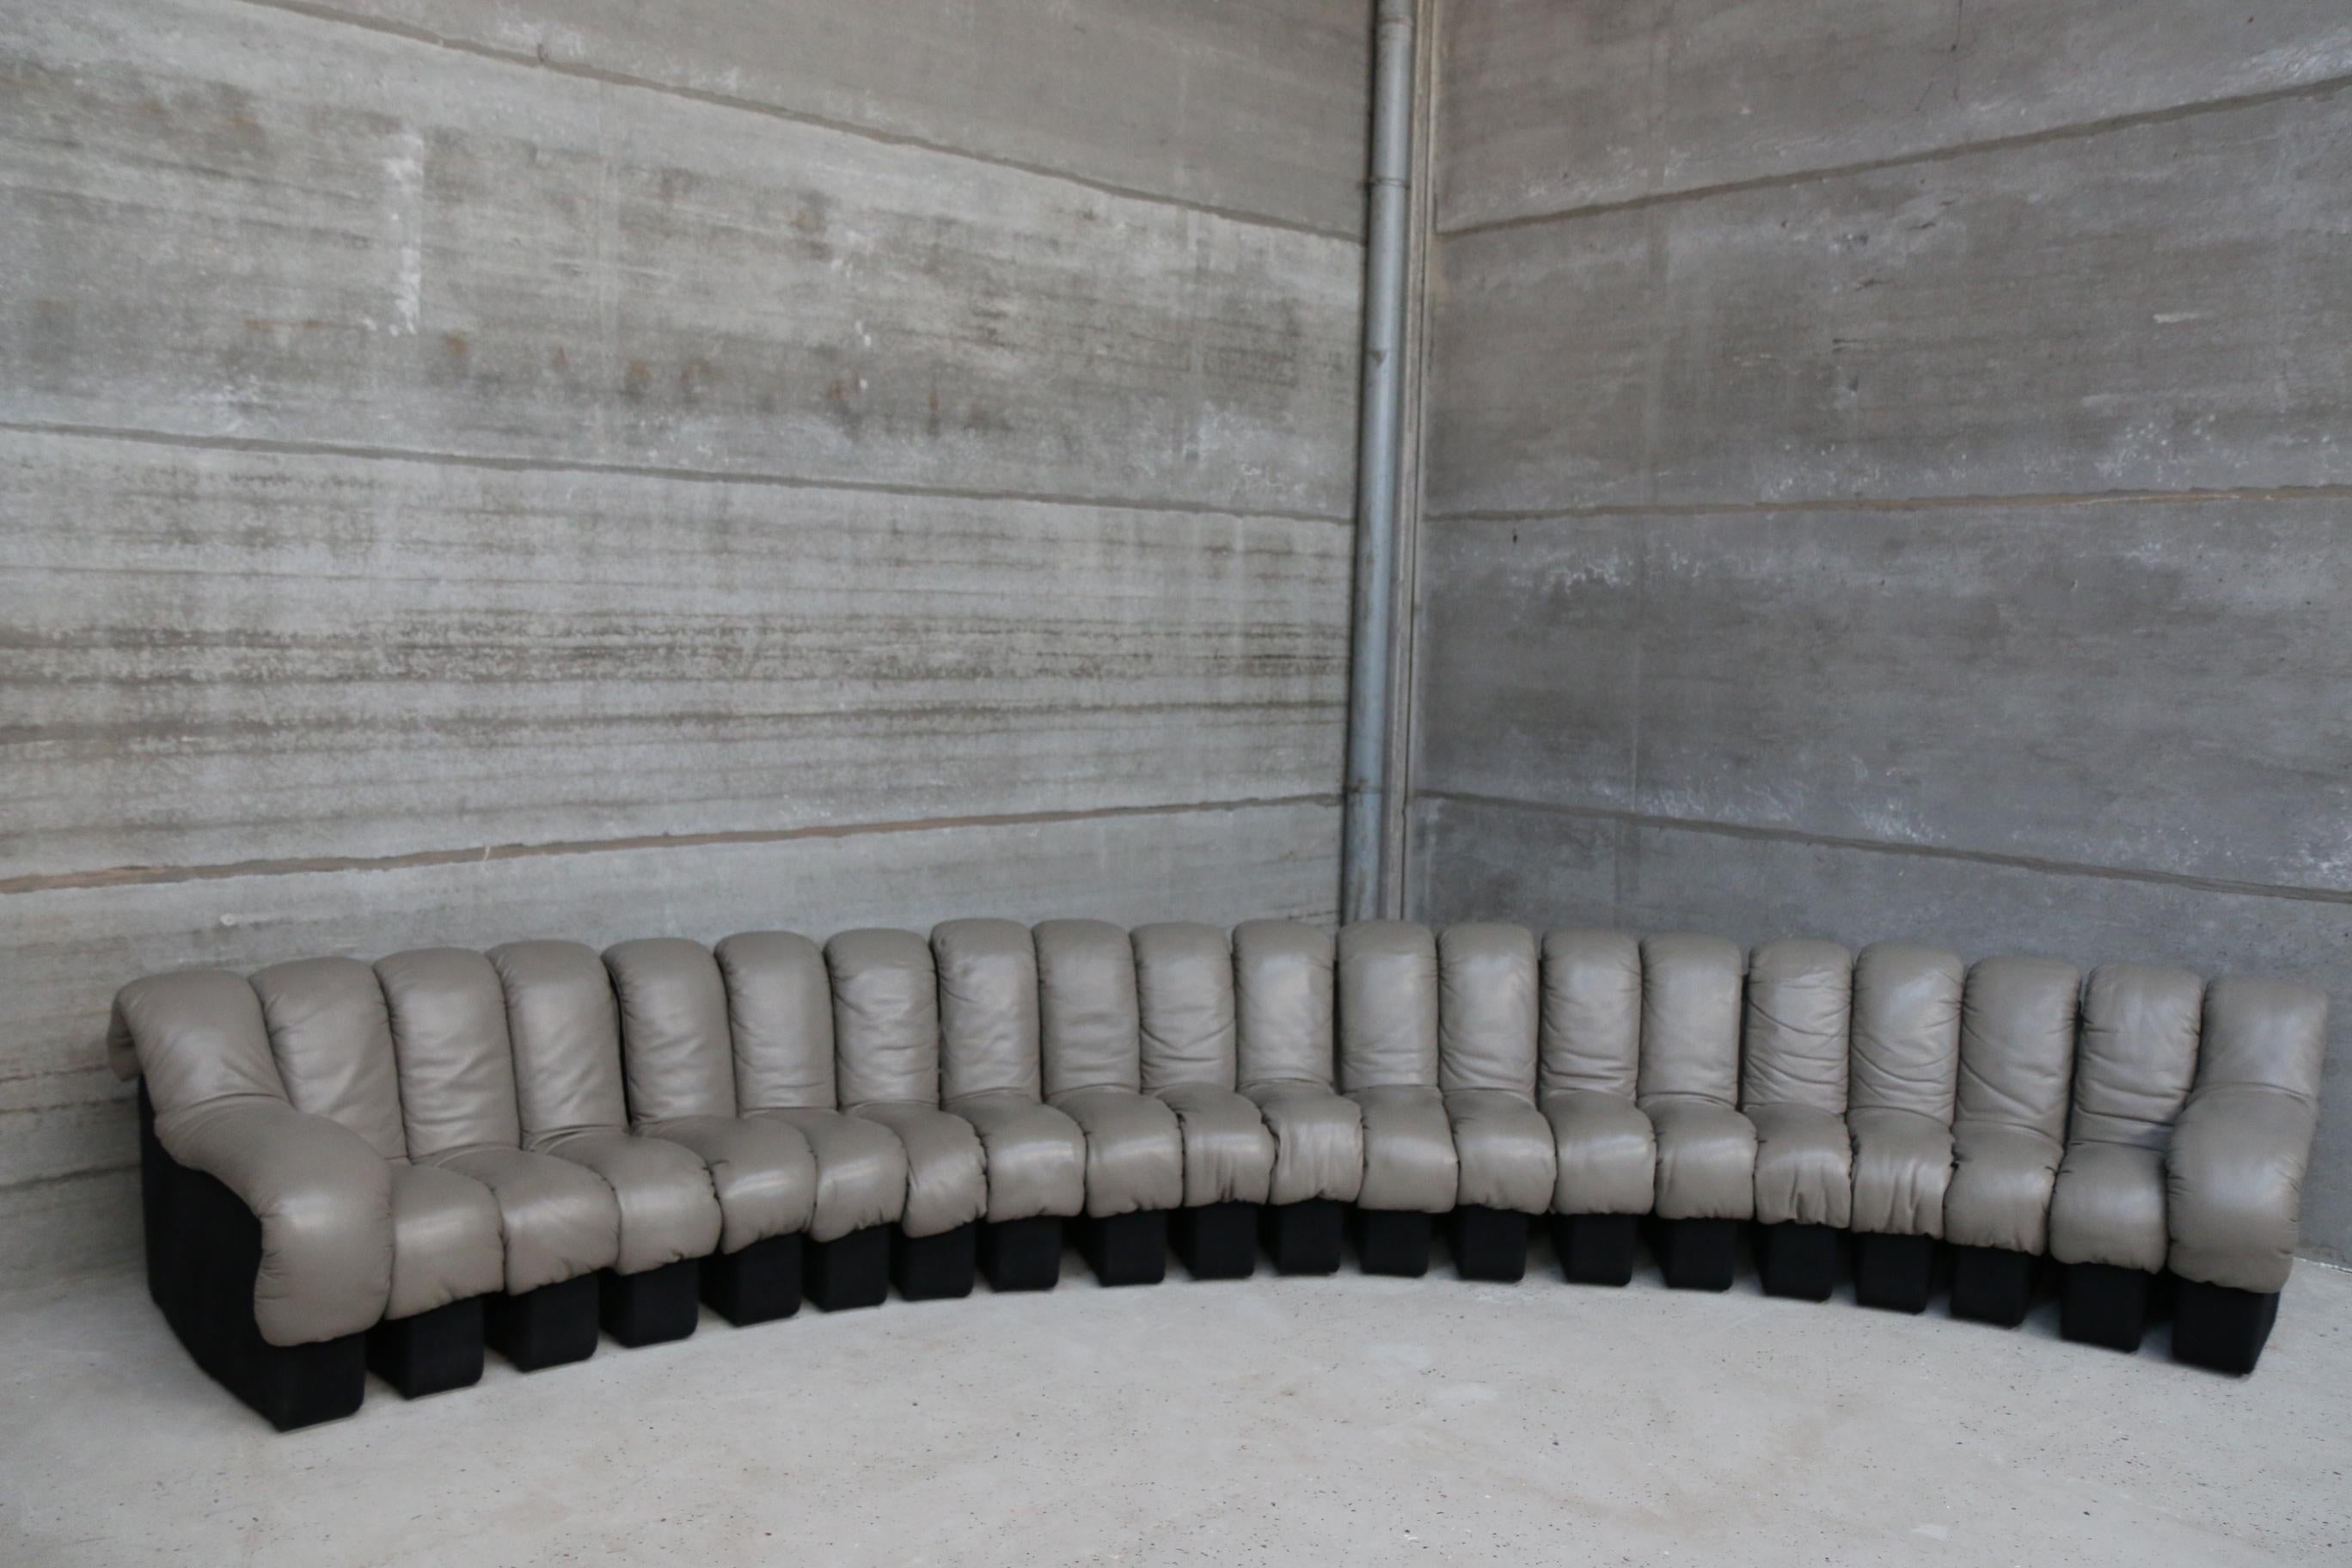 Magnificent cult ''snake sofa'' designed by Eleanora Peduzzi-Riva, Heinz Ulrich, and Ueli bergere for the Rolls Royce of sofa manufacturers De Sede Switserland.
This set is in superb vintage condition, it was located in a guest room and was not